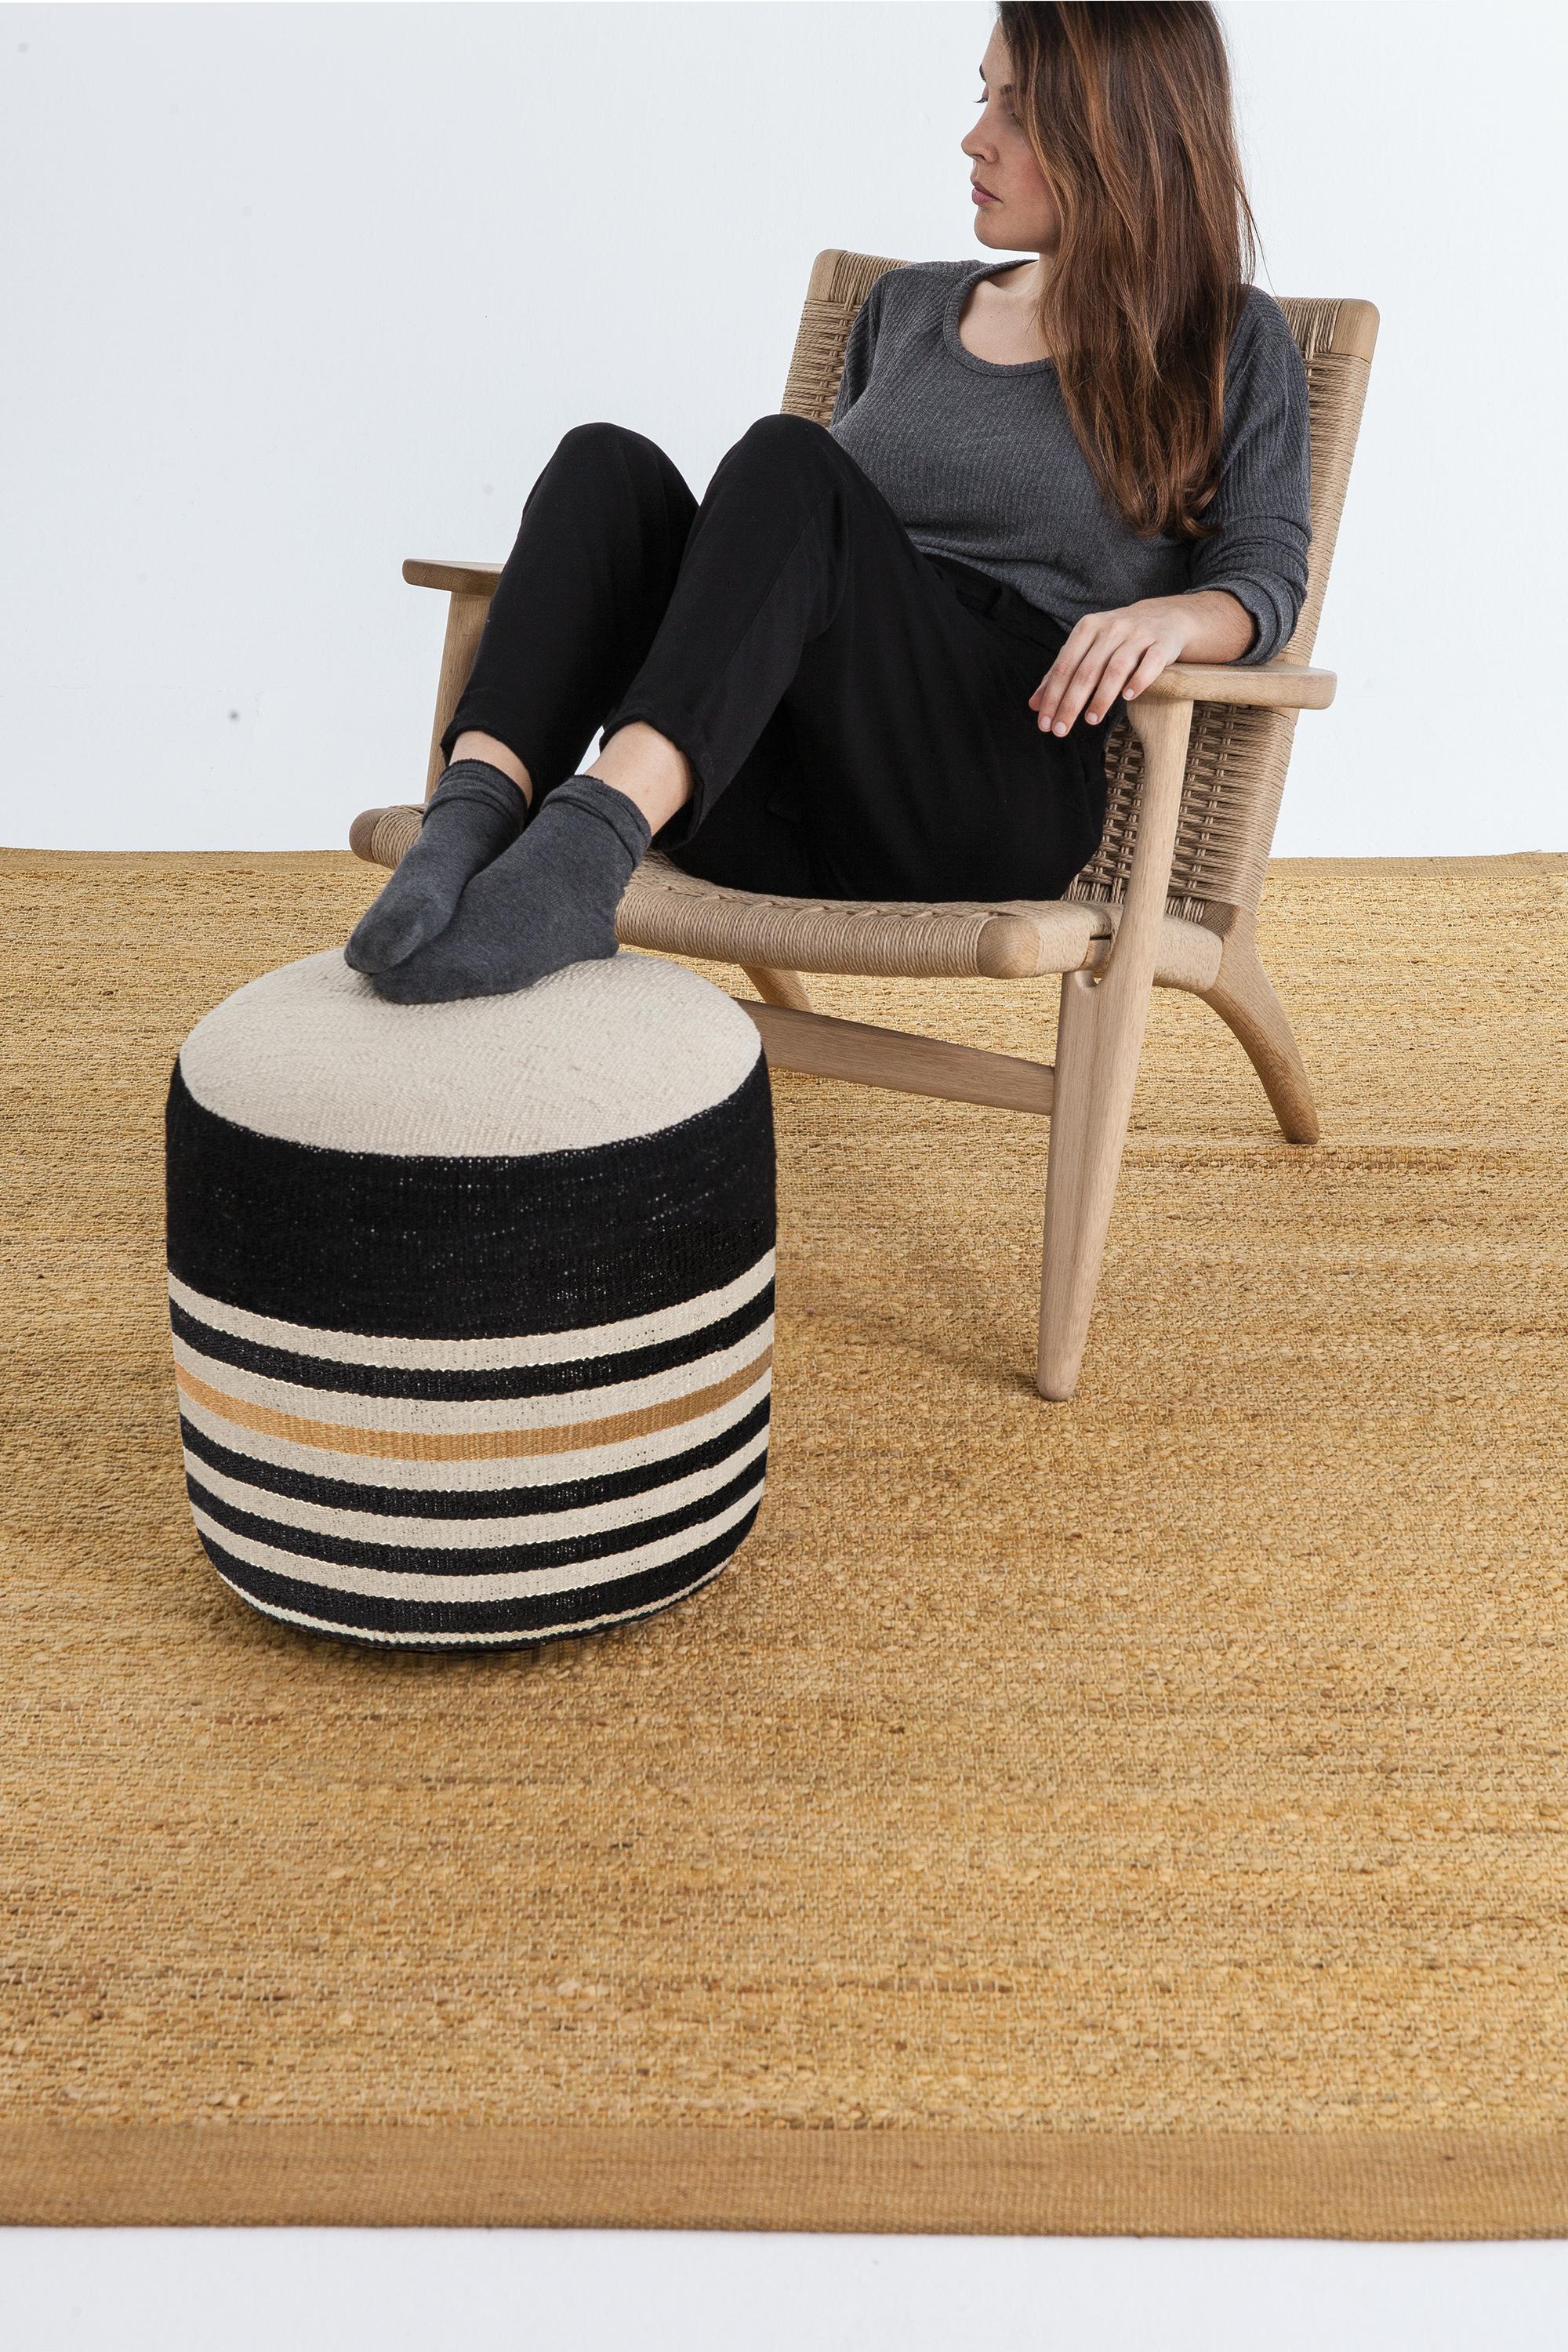 Wool 'Kilim 3' Pouf by Nani Marquina and Marcos Catalán for Nanimarquina For Sale